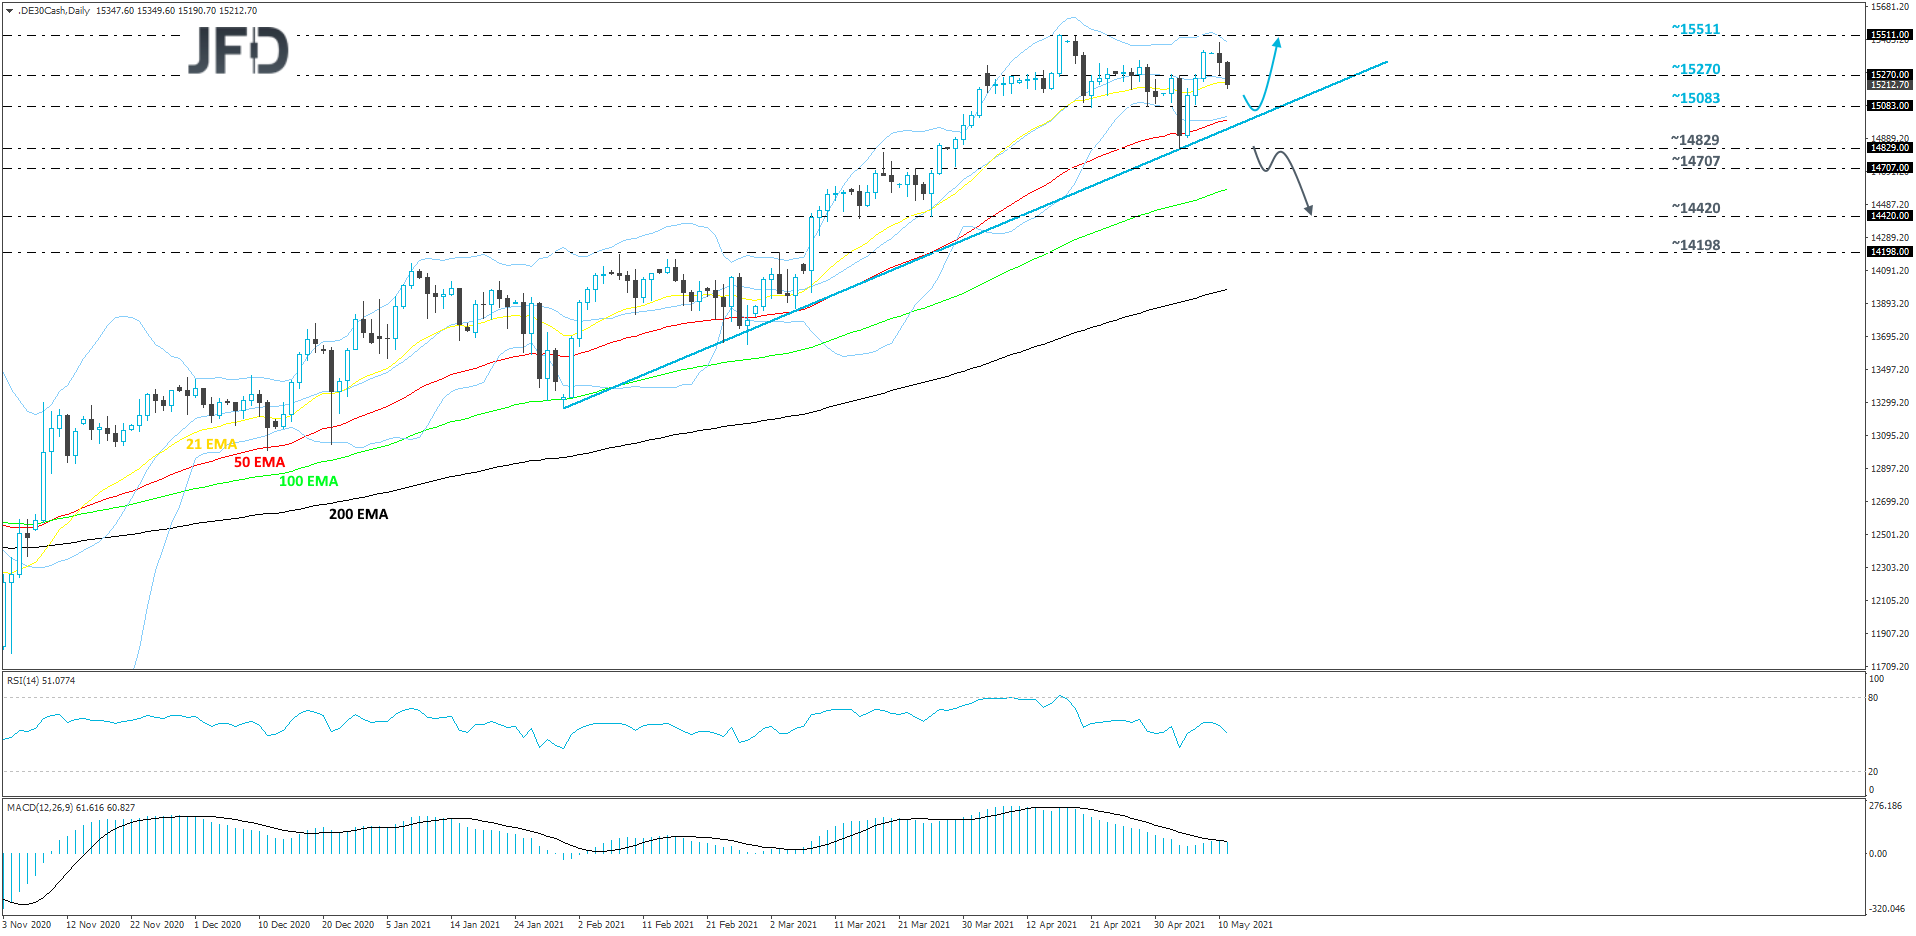 German DAX cash index daily chart technical analysis